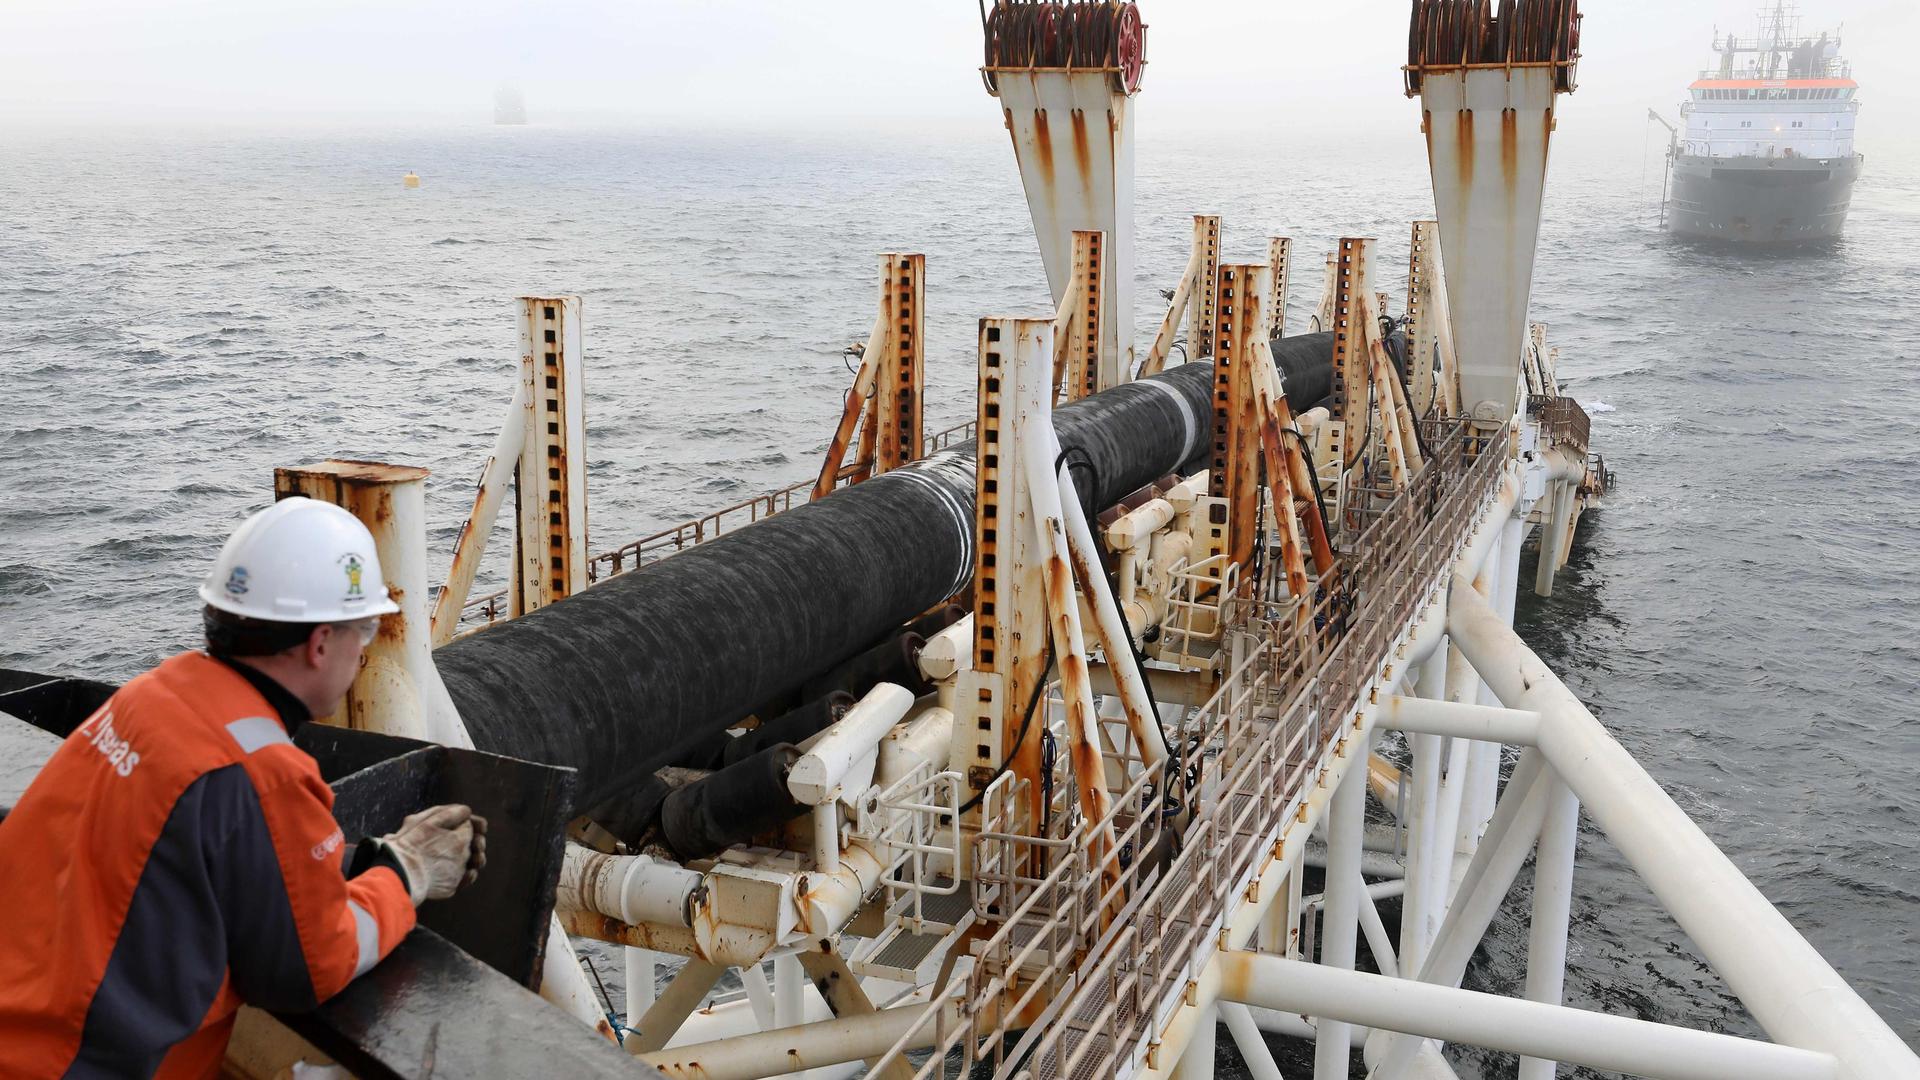 Parts of the Nord Stream 2 pipeline are laid in the Baltic Sea off the coast of northeastern Germany on 15 November, 2018.